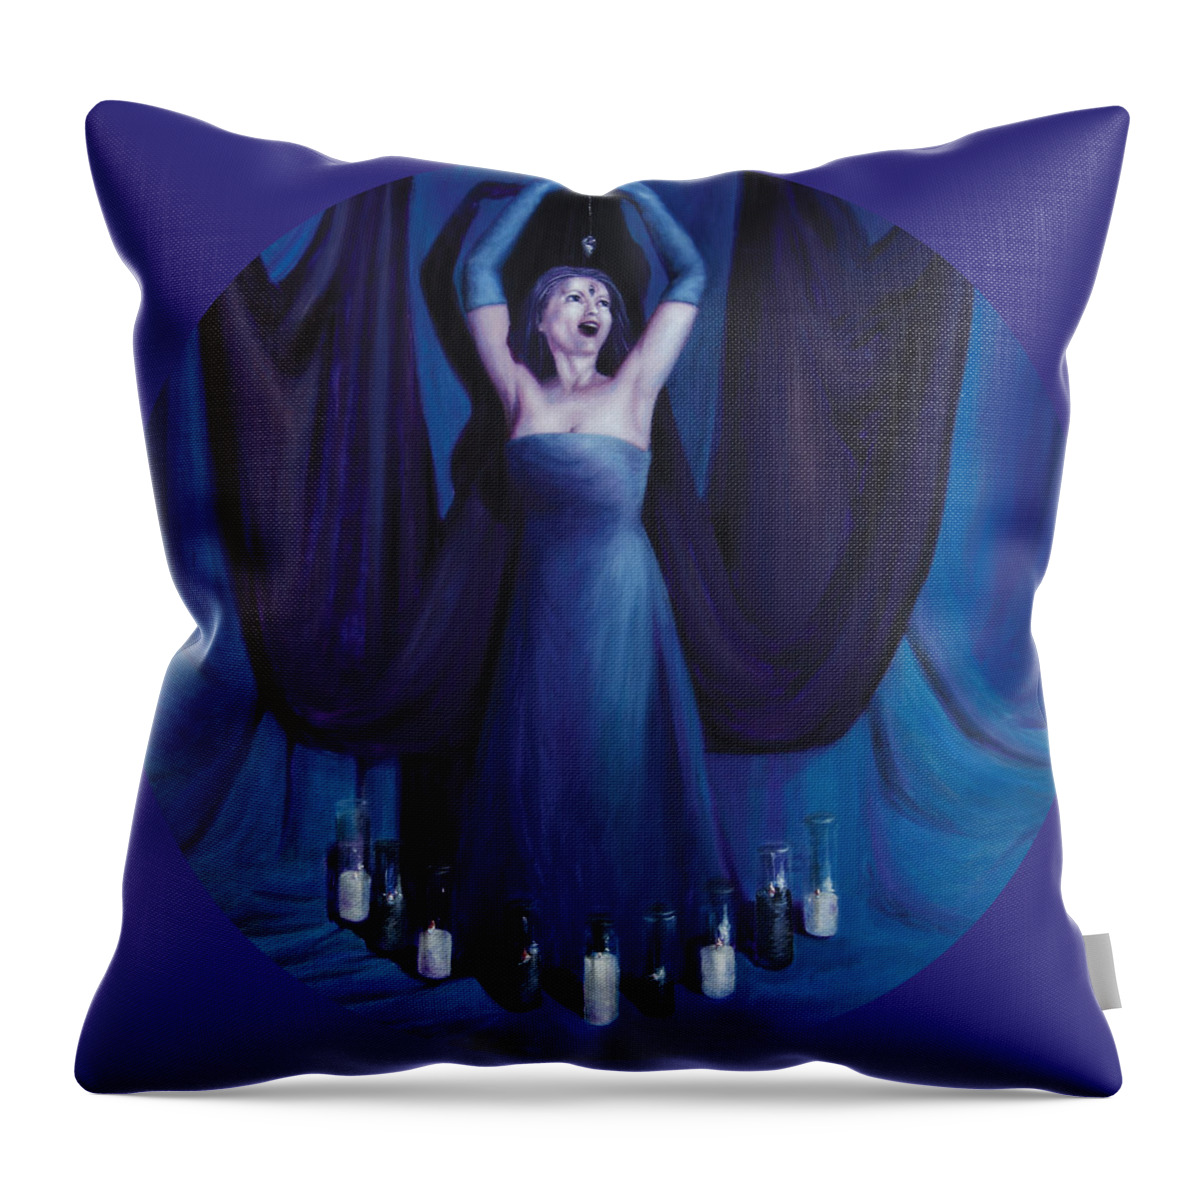 Shelley Irish Throw Pillow featuring the painting The Seer by Shelley Irish